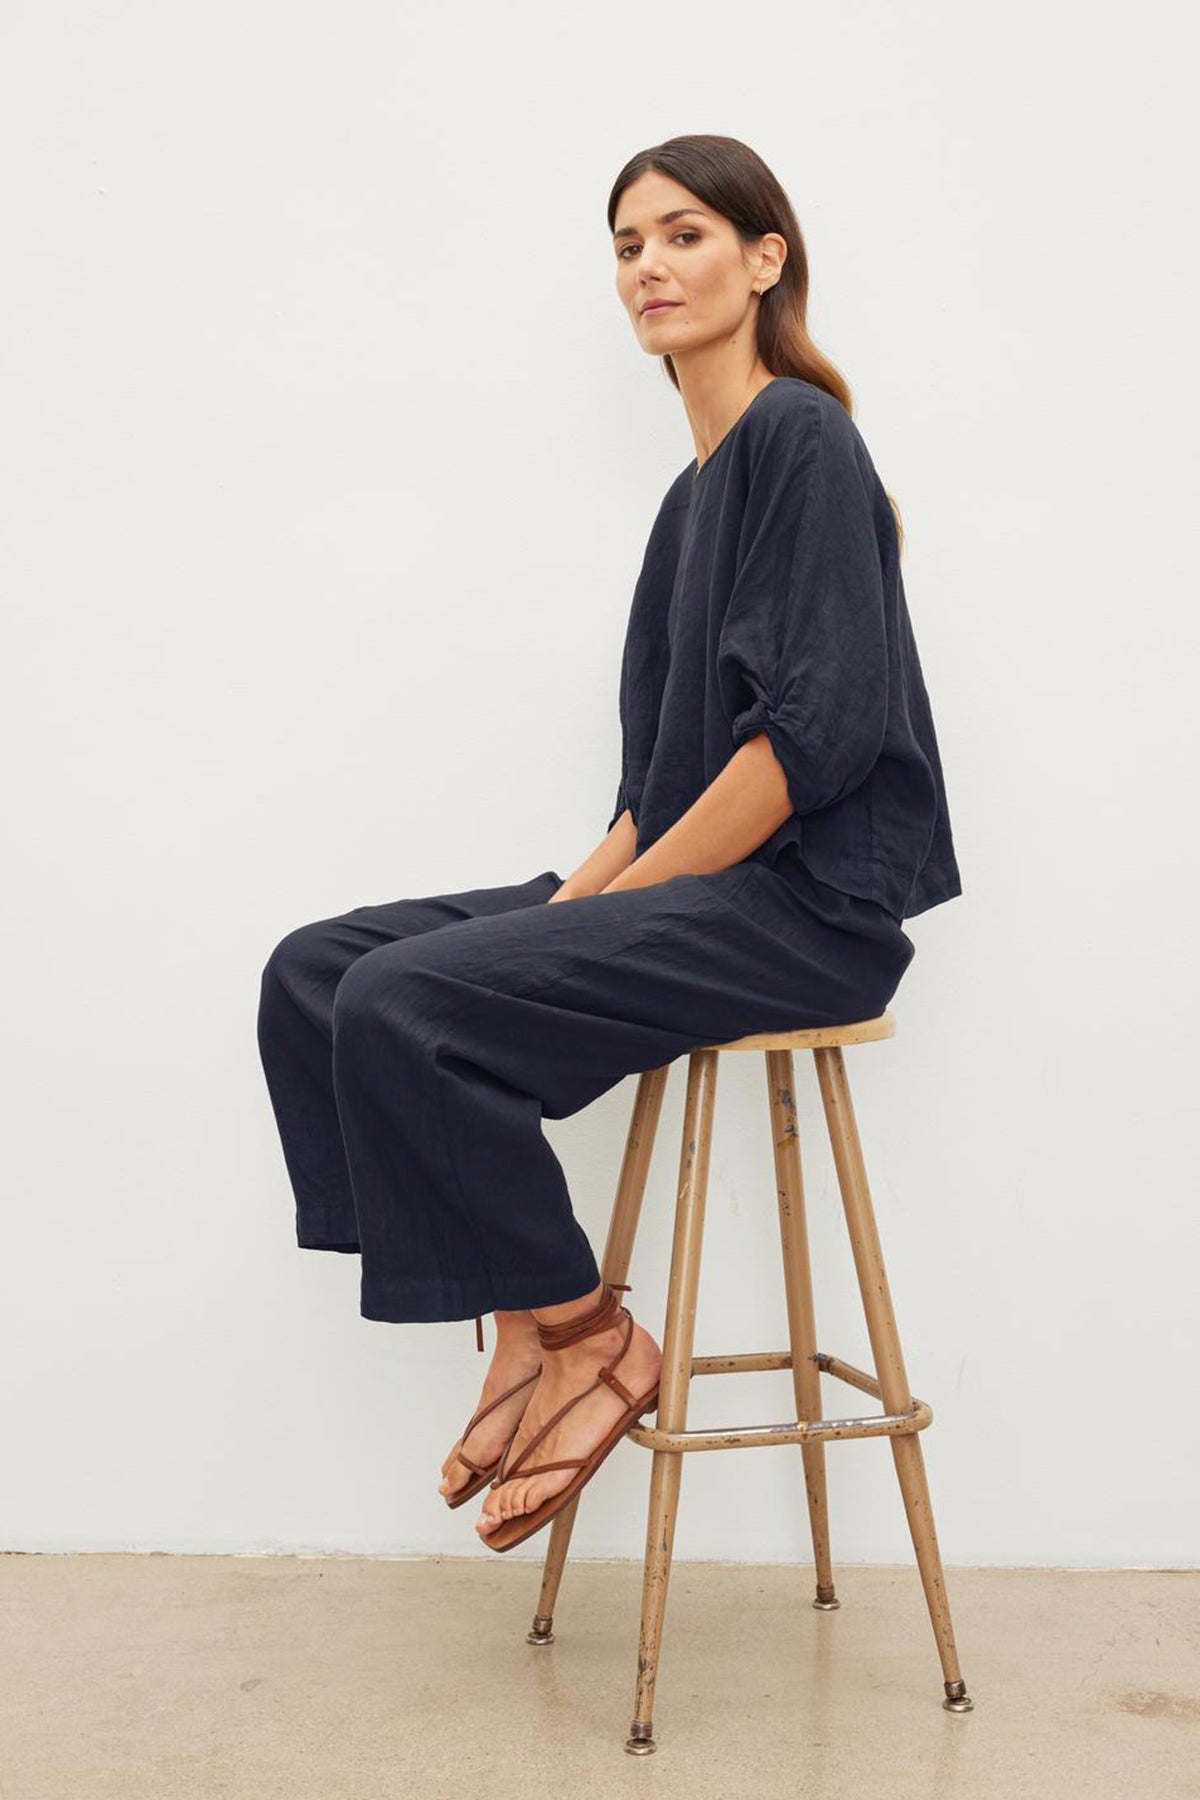 Woman with long dark hair sits on a wooden stool wearing a loose-fitting navy outfit with Velvet by Graham & Spencer's LOLA LINEN PANT and brown sandals, against a plain white background.-37240066441409